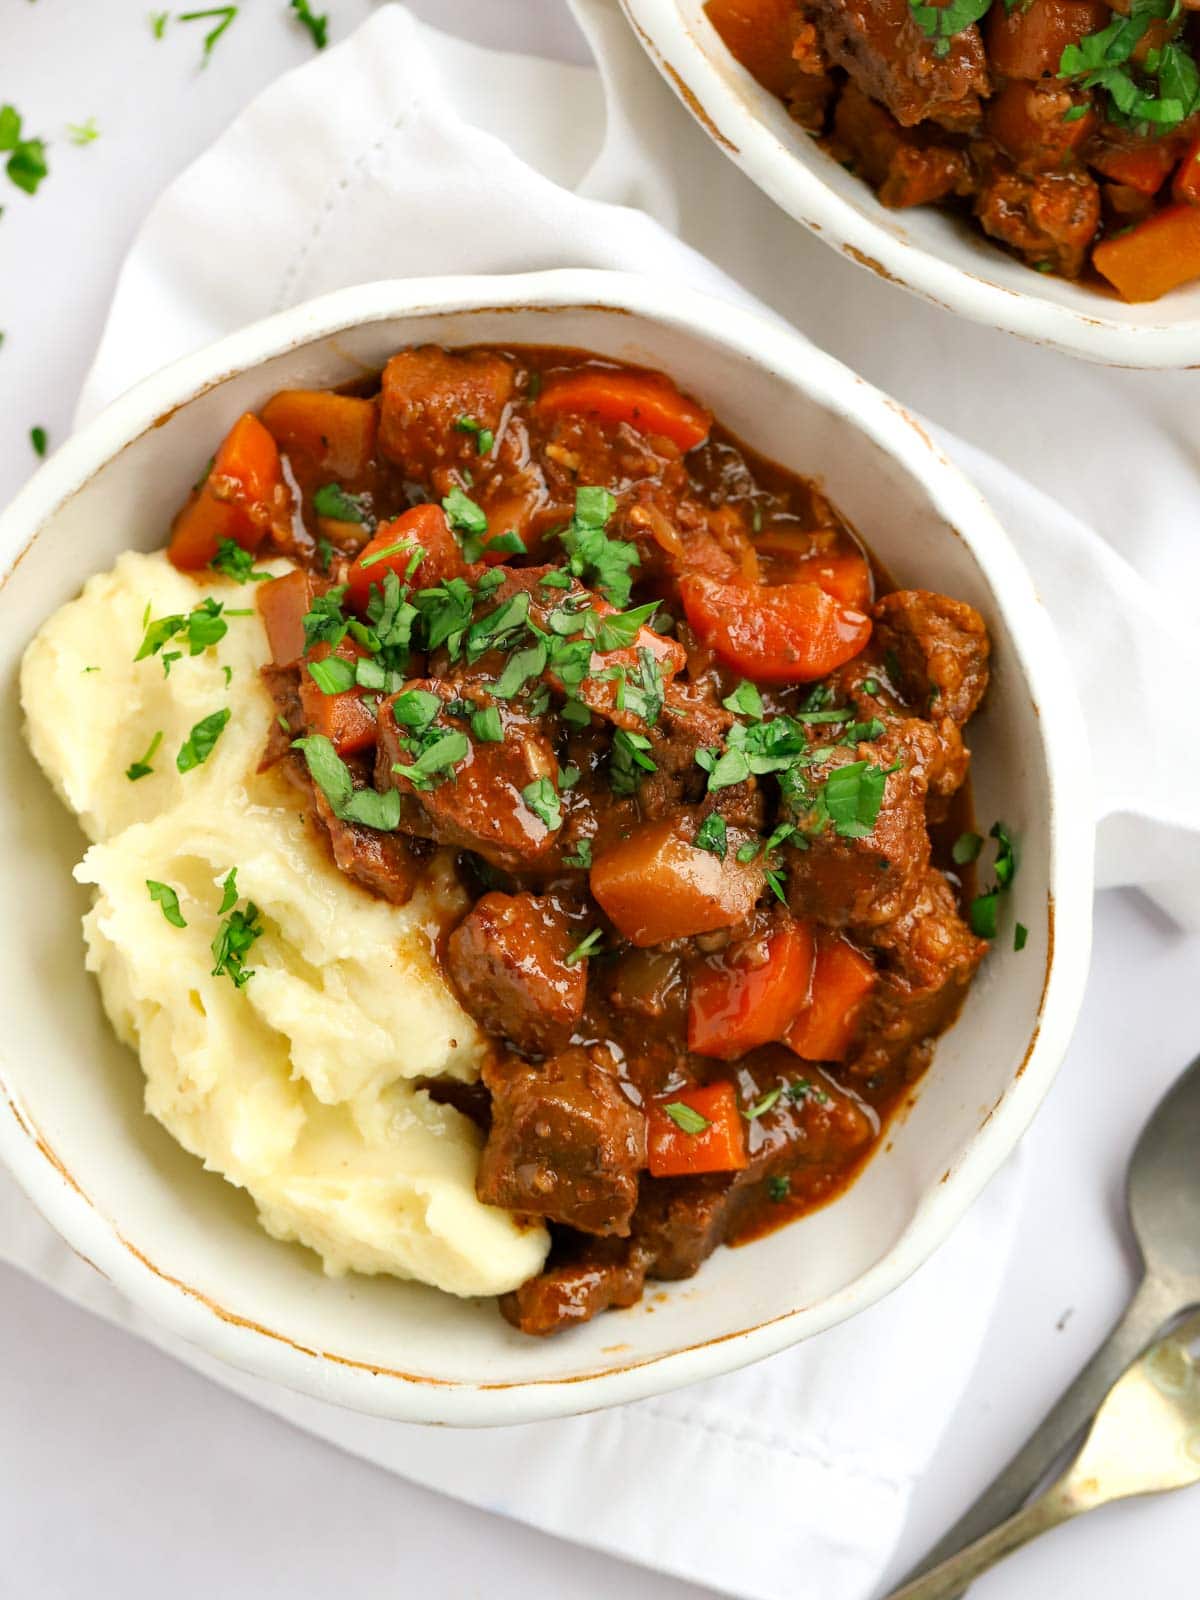 Easy beef stew recipe made in the slow cooker with carrots and swede